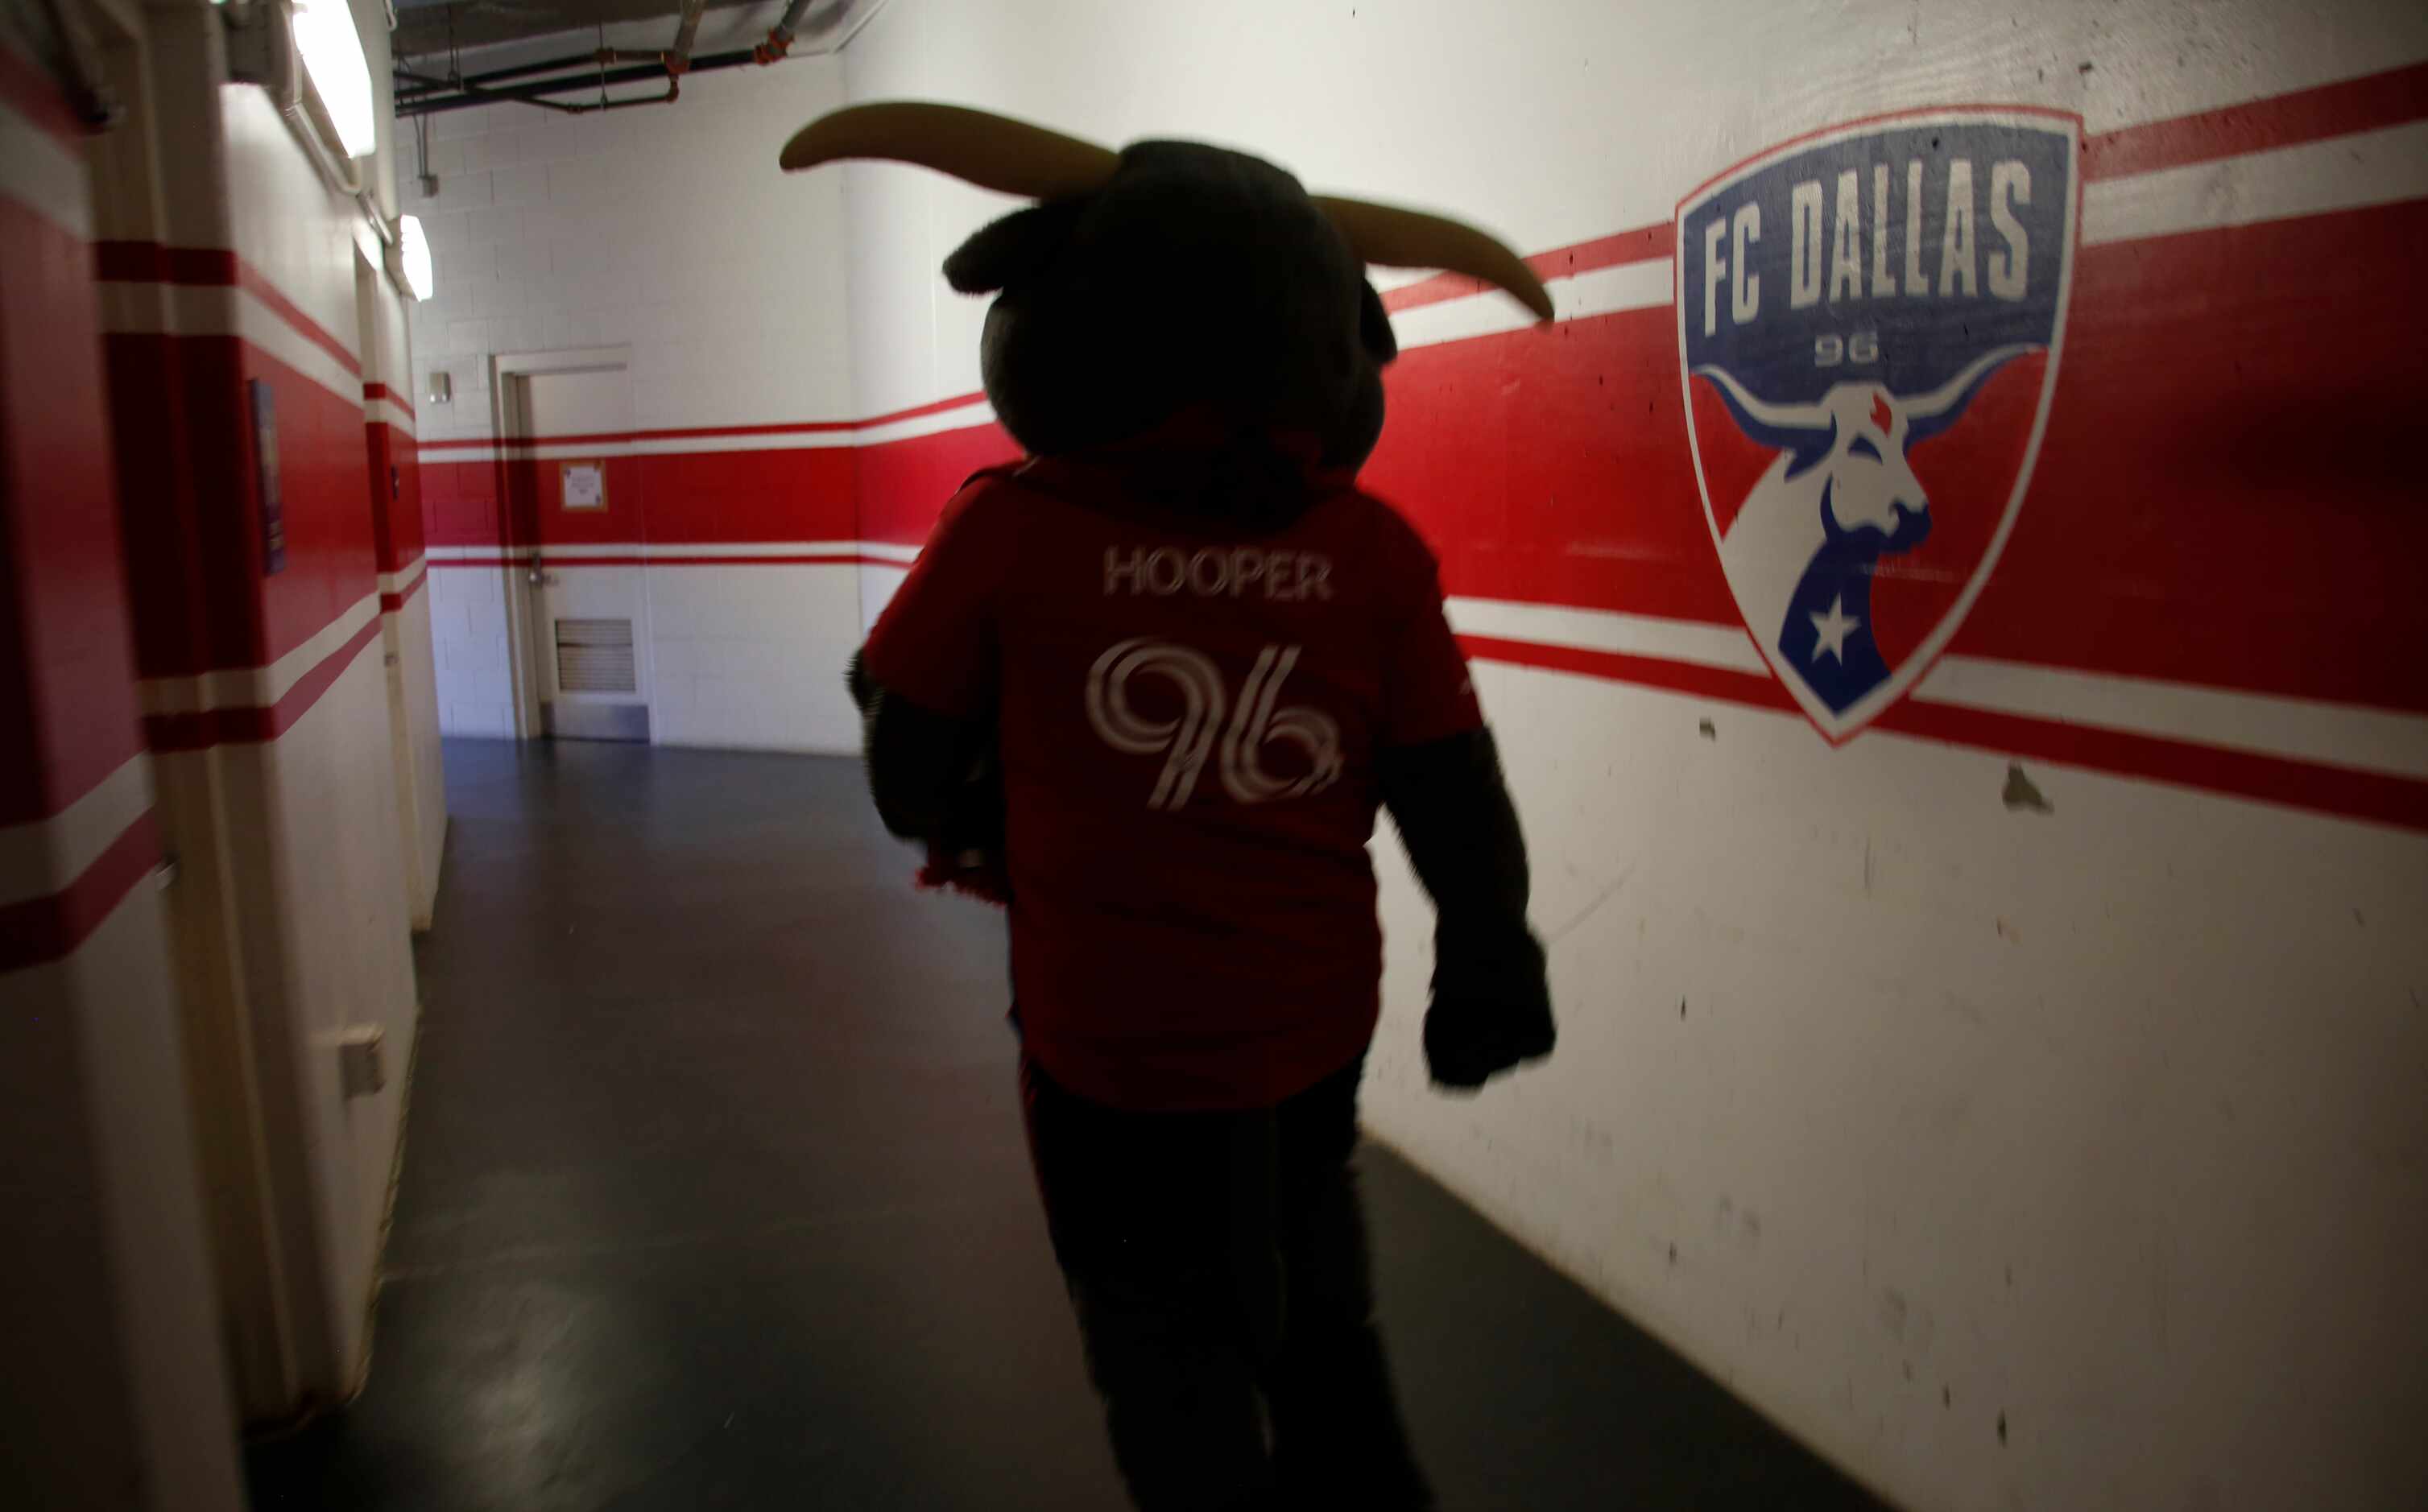 FC Dallas mascot "Hooper" leaves the locker room area and heads to the field prior to the...